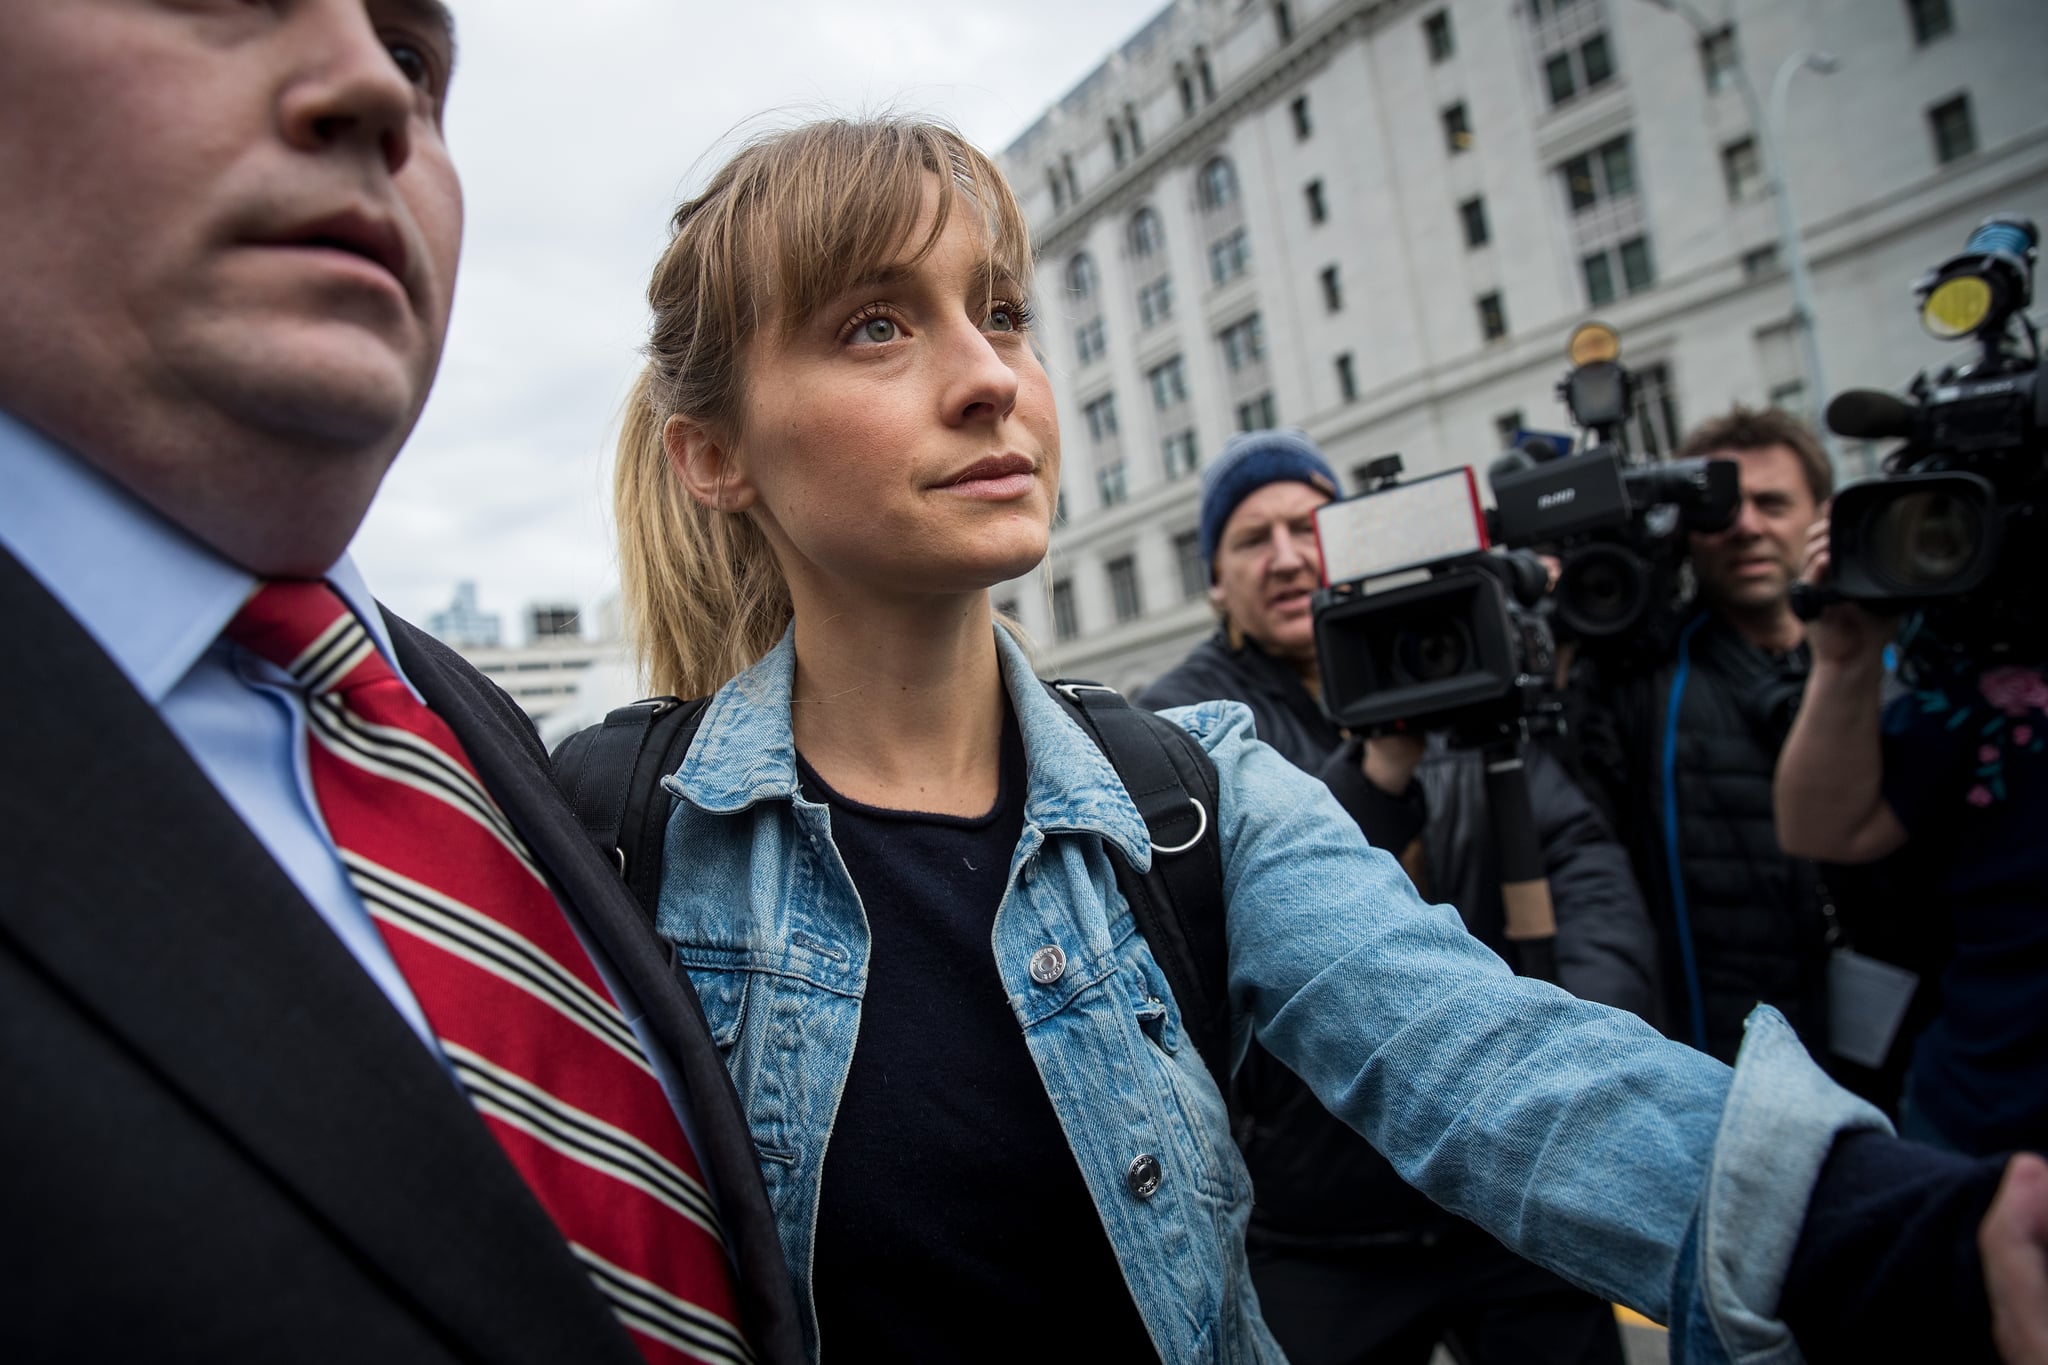 NEW YORK, NY - APRIL 24: Actress Allison Mack leaves U.S. District Court for the Eastern District of New York after a bail hearing, April 24, 2018 in the Brooklyn borough of New York City. Mack was charged last Friday with sex trafficking for her involvement with a self-help organisation for women that forced members into sexual acts with their leader. The group, called Nxivm, was led by founder Keith Raniere, who was arrested in March on sex-trafficking charges. She was released on bail at $5 million. (Photo by Drew Angerer/Getty Images)